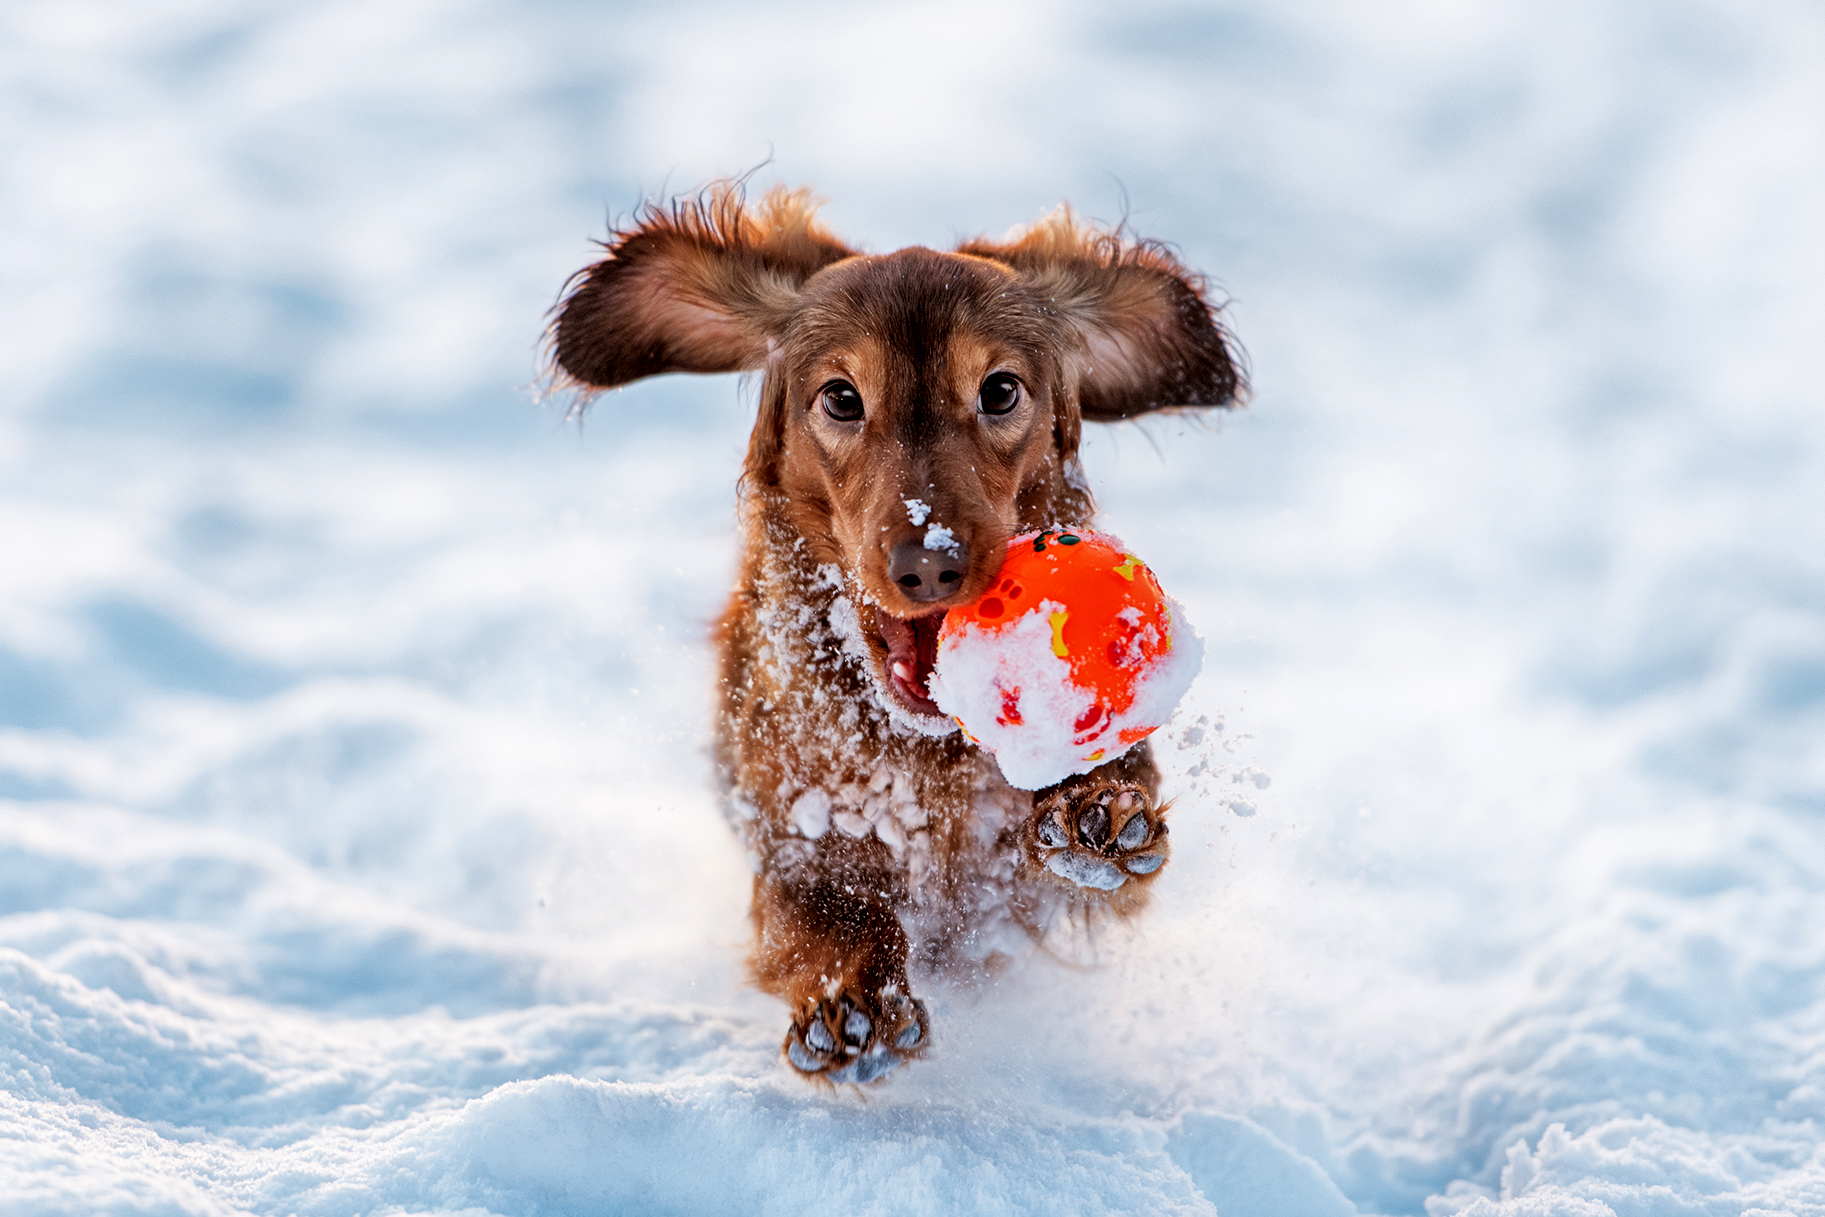 Pictures of Dogs Playing in Snow, Dogs Enjoying Winter | Unleashed